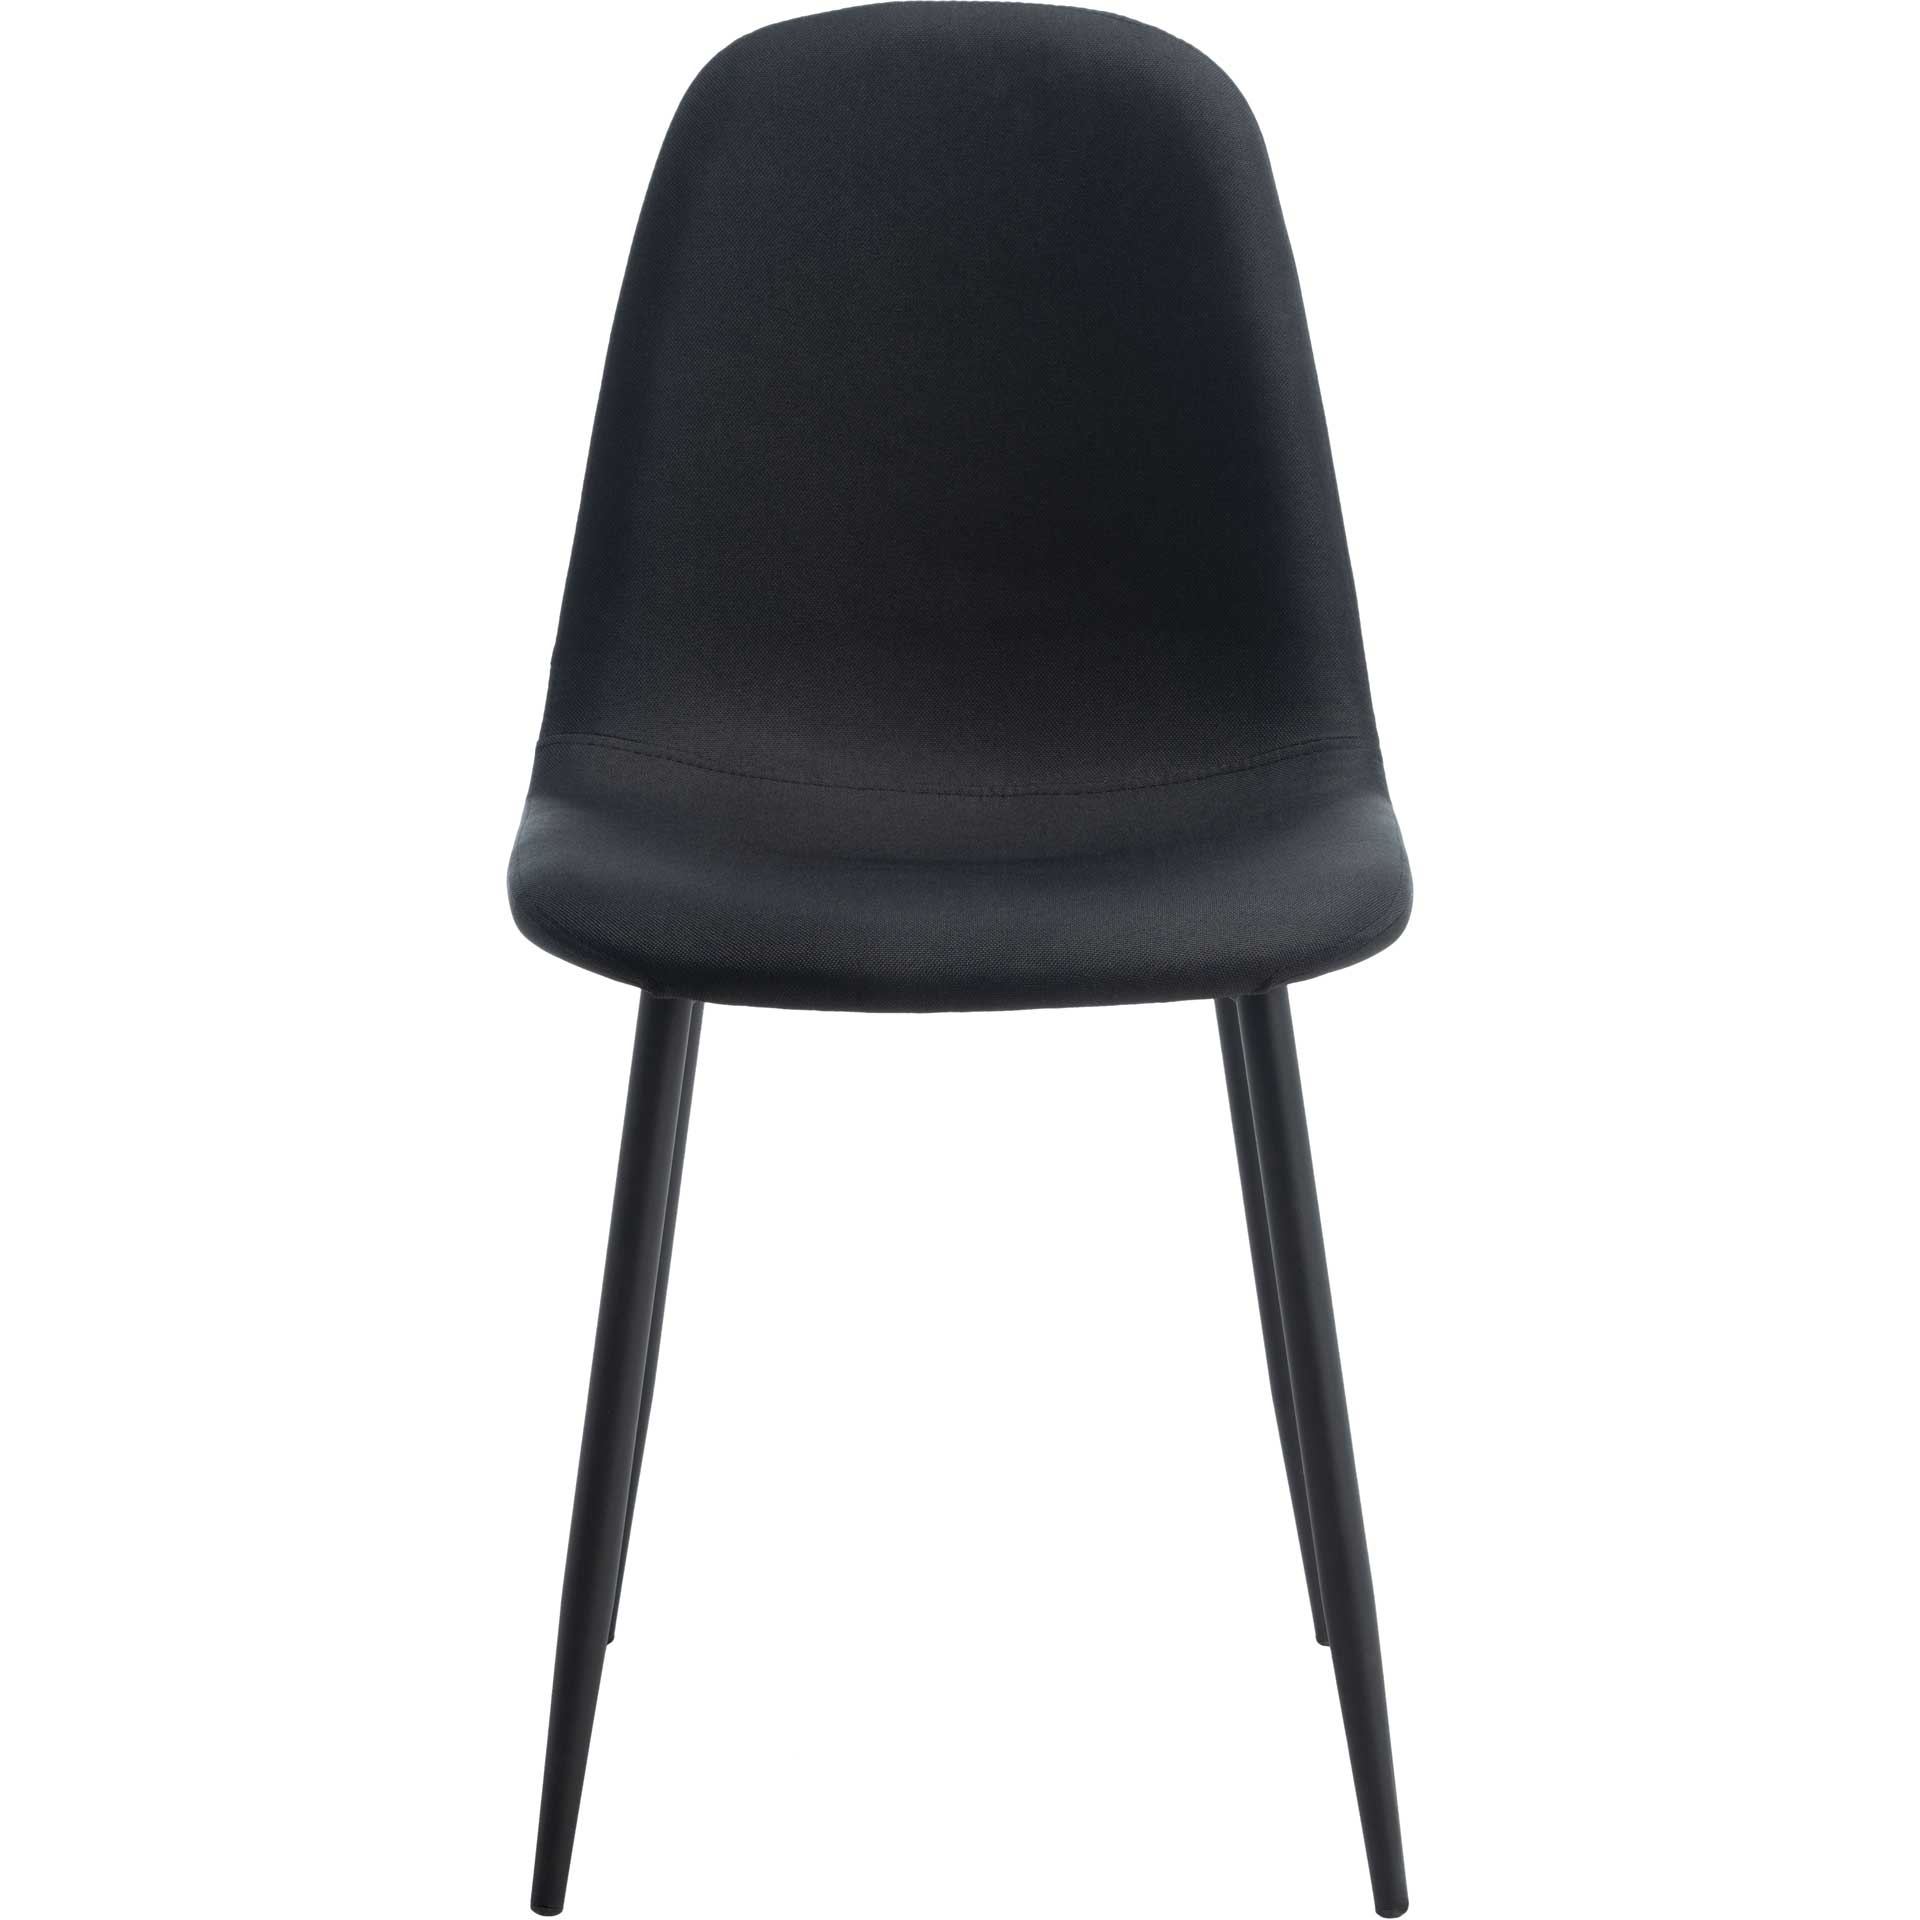 Blaize Dining Chair Black (Set of 2)